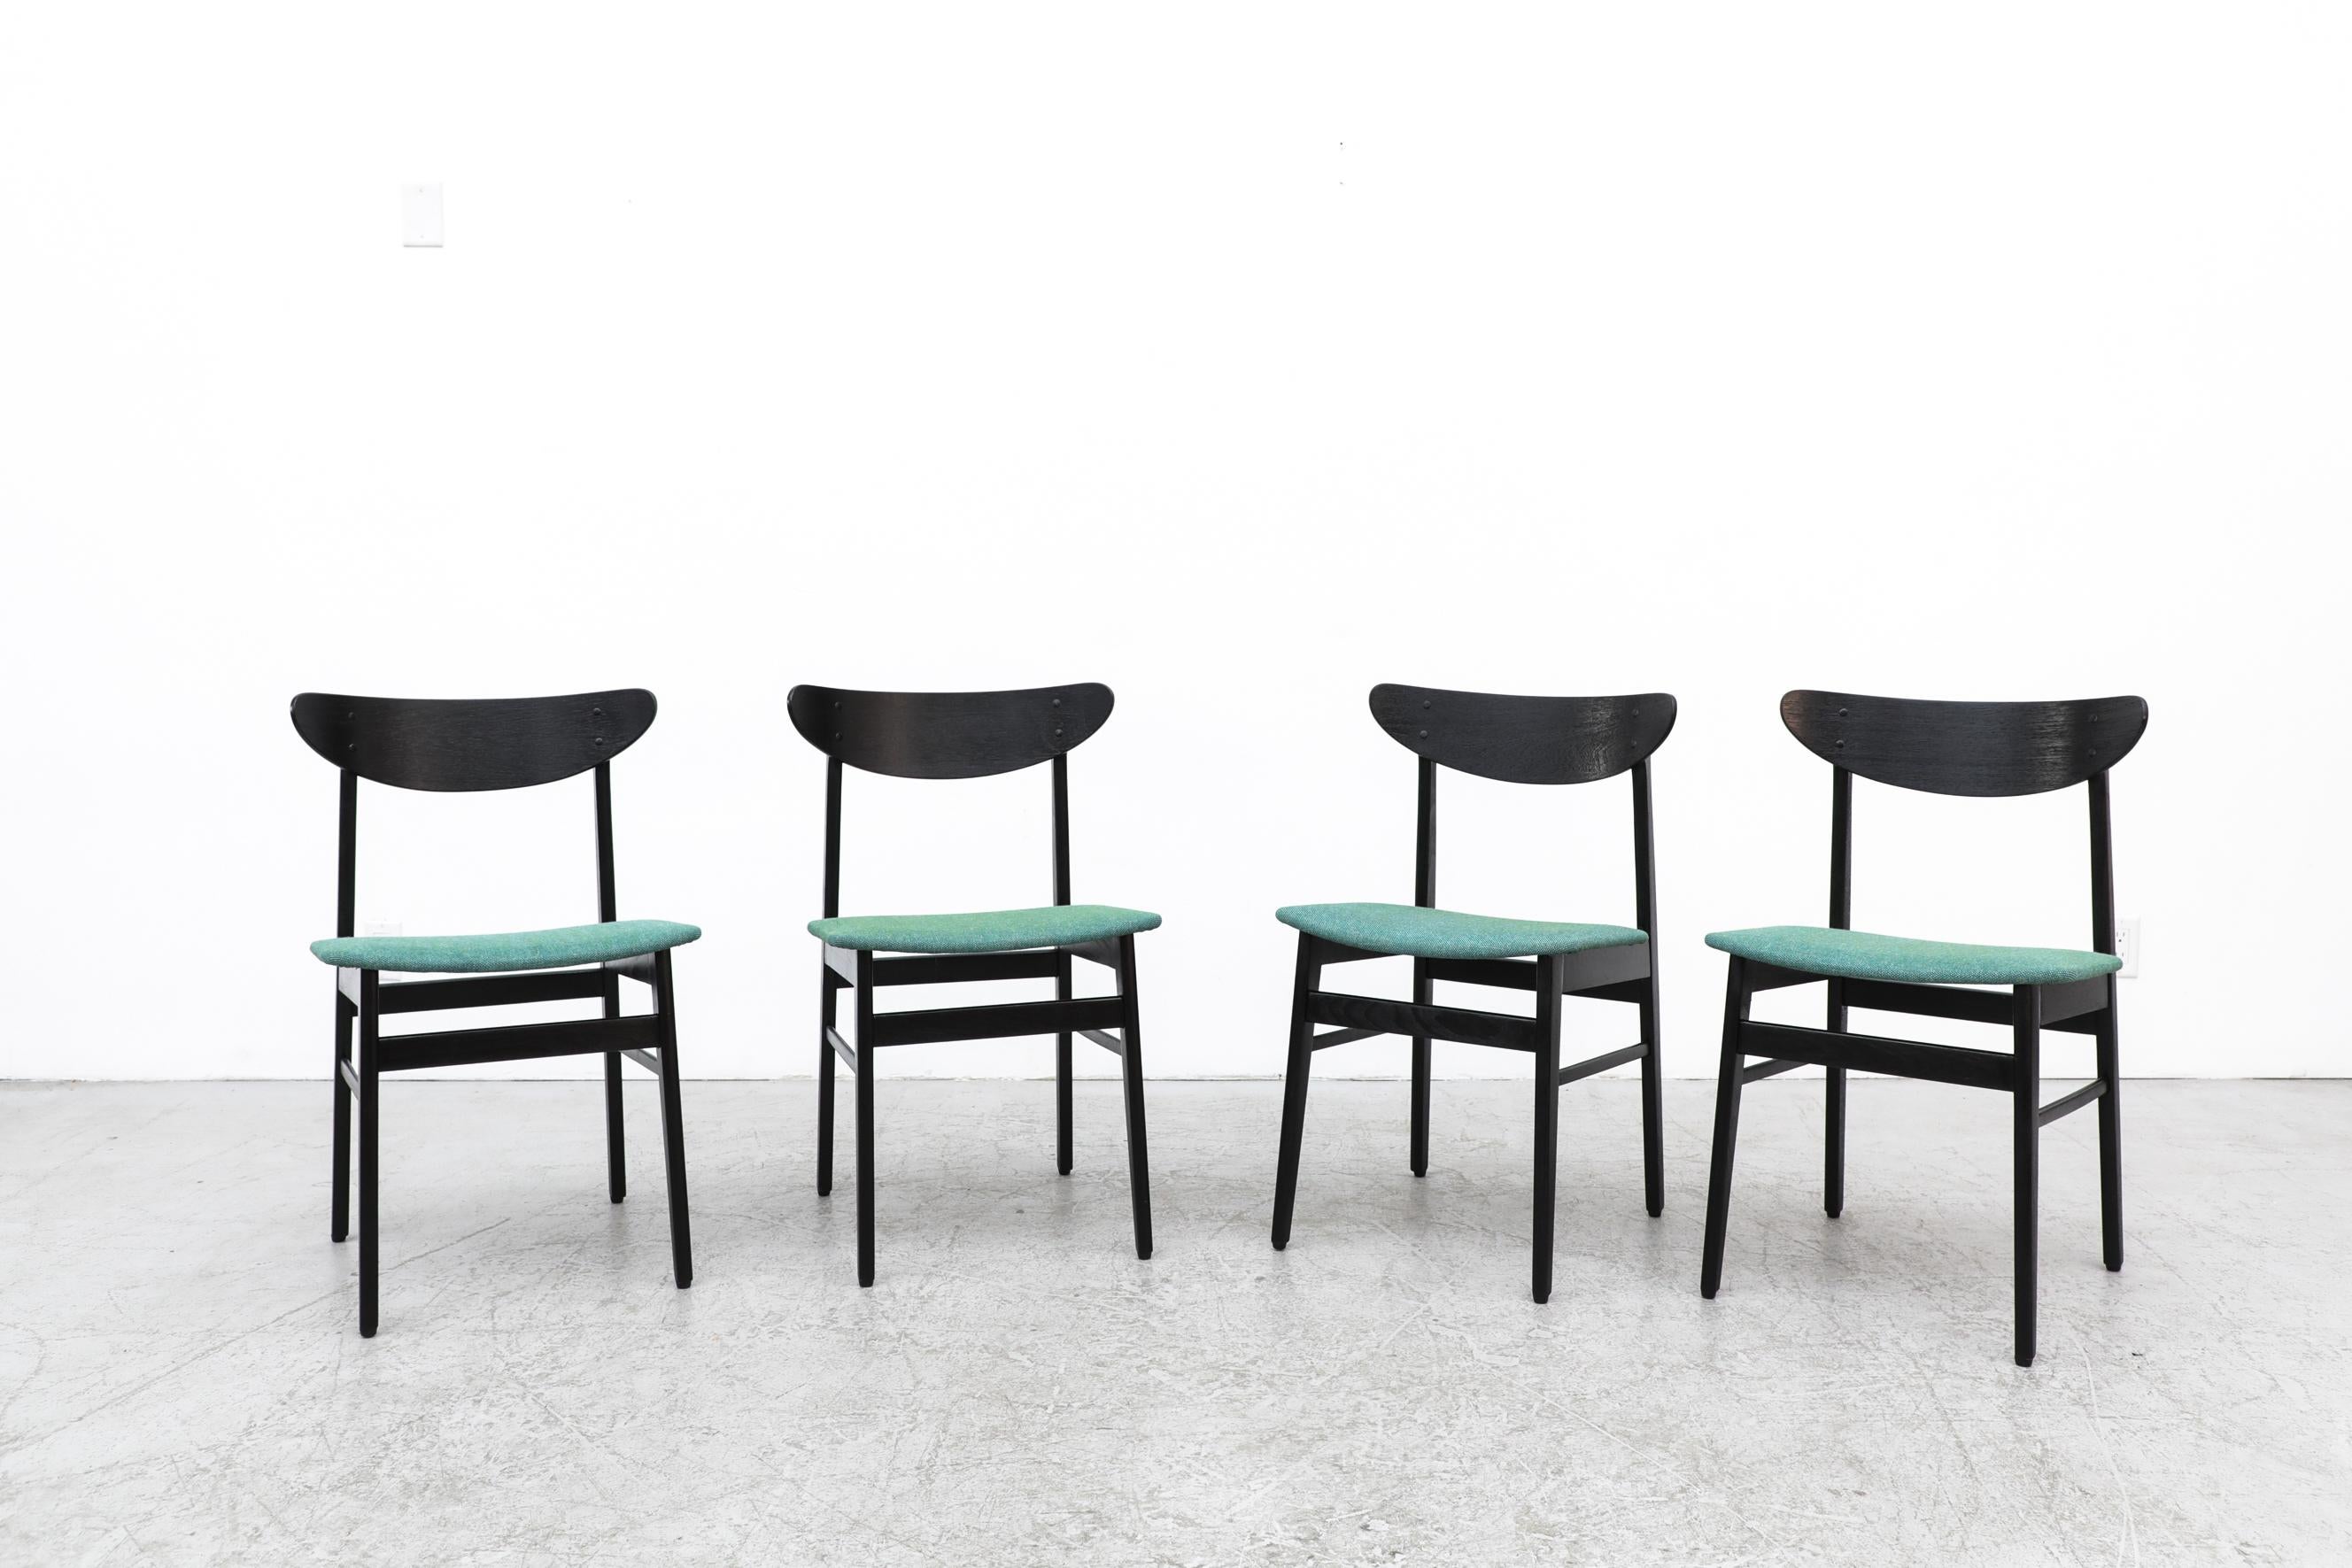 Set of 4 Wegner style black lacquered dining chairs by Farstrup. Almond shaped backrests and green upholstered seats make these comfortable as well as striking. In original condition with some light wear, consistent with their age and use.